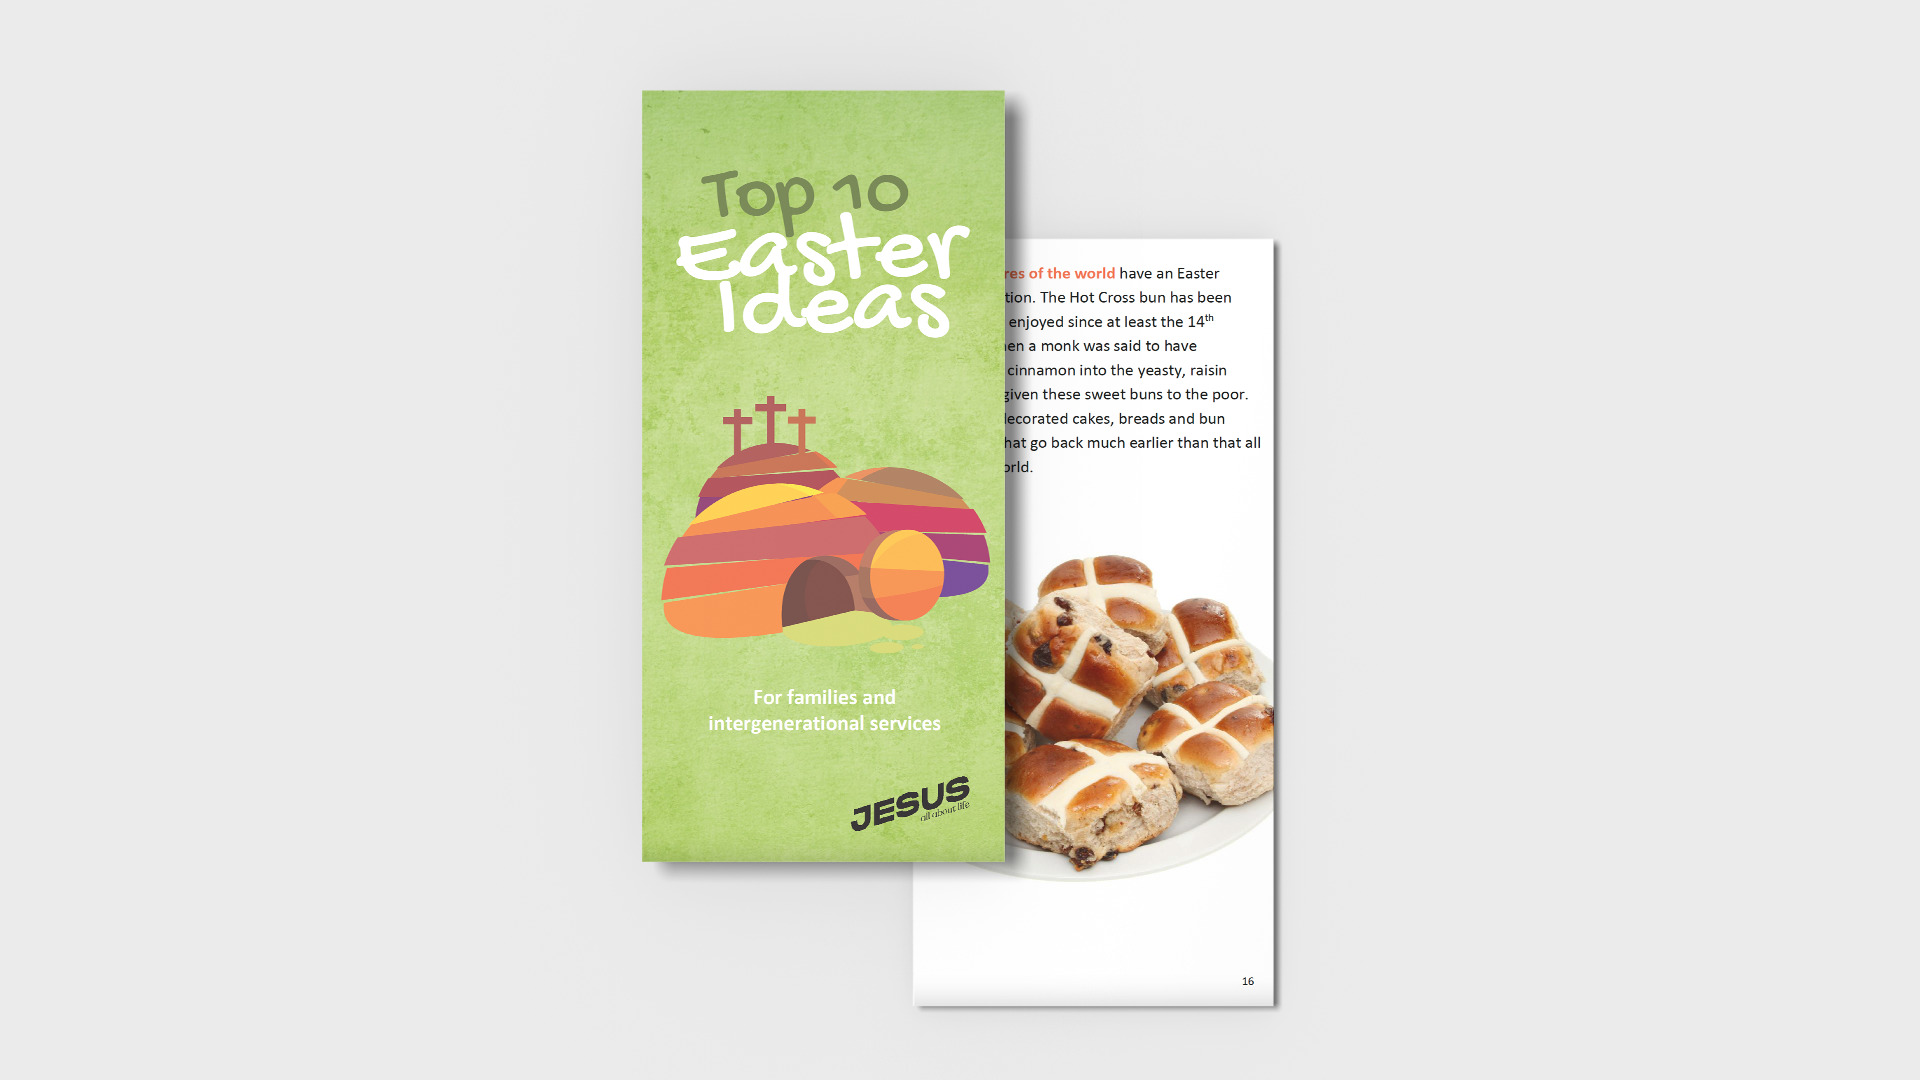 TOP 10 EASTER SERVICE IDEAS